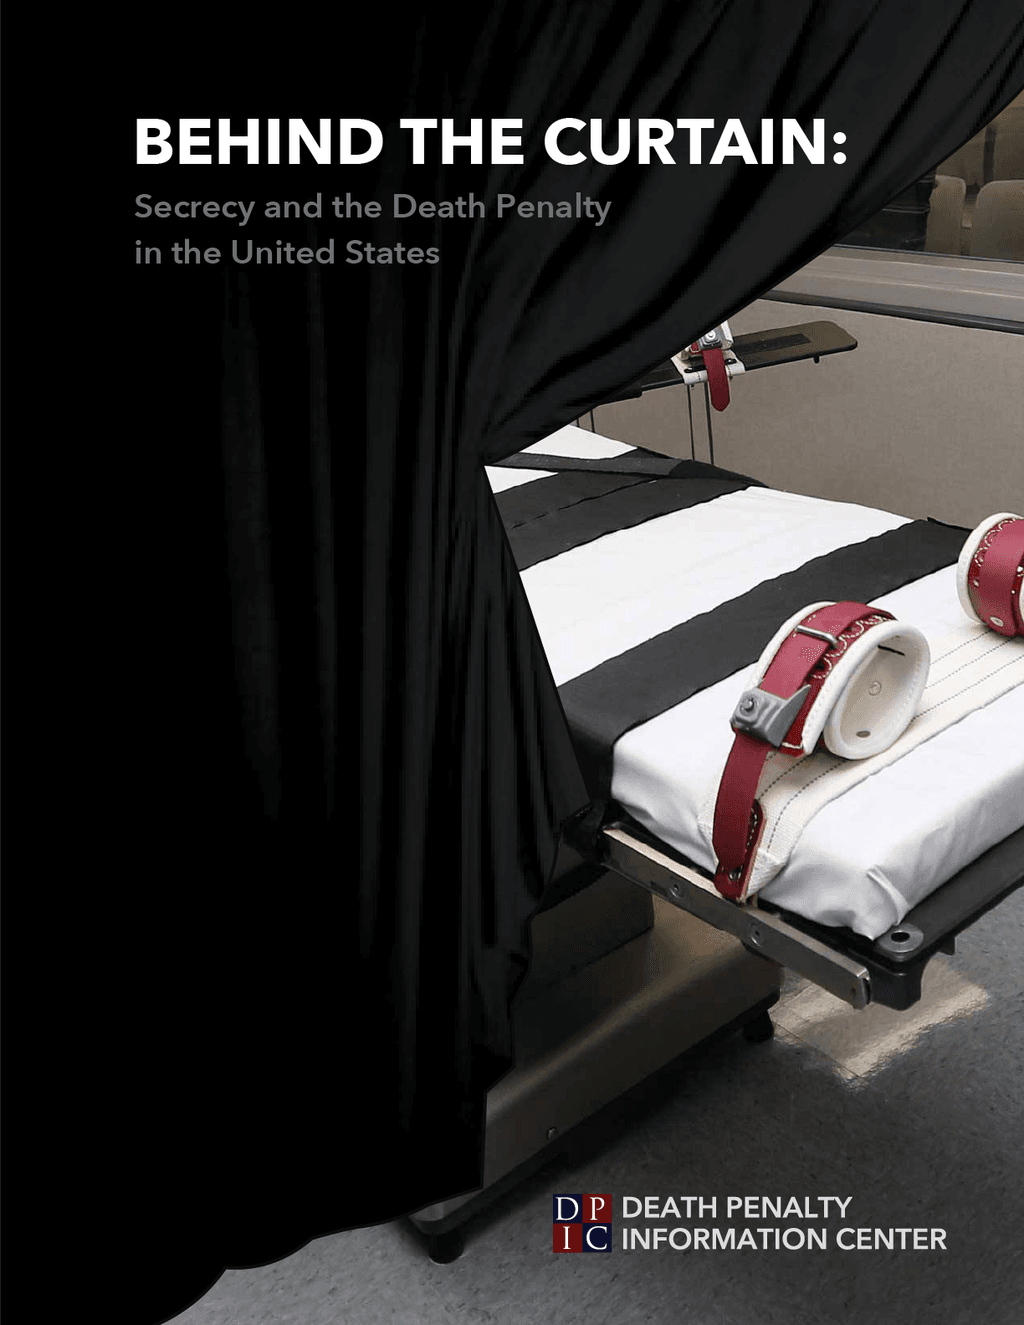 Behind the Curtain: Secrecy and the Death Penalty in the United States